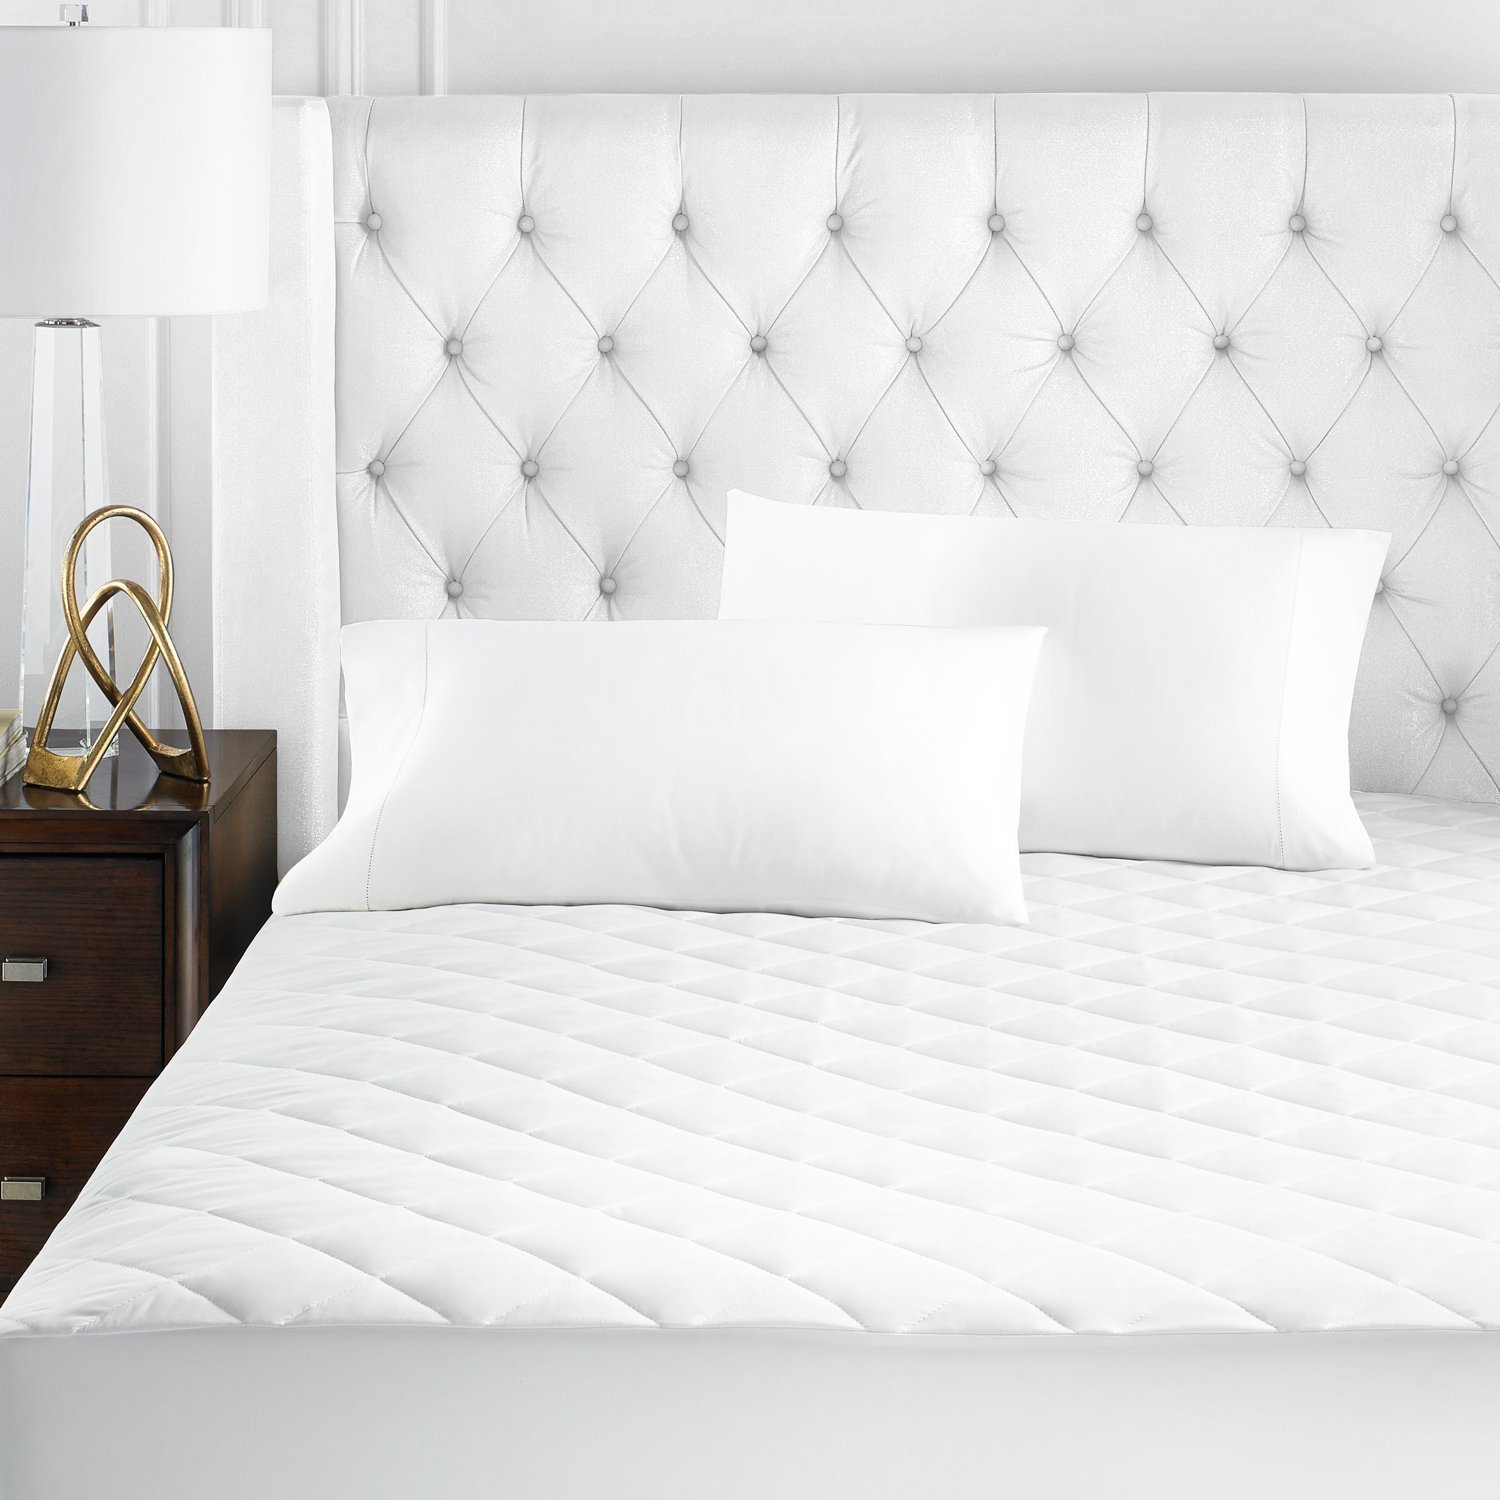 Beckham Hotel Collection Microfiber Mattress Pad - Quilted, Hypoallergnic, and Water-Resistant - Cal King